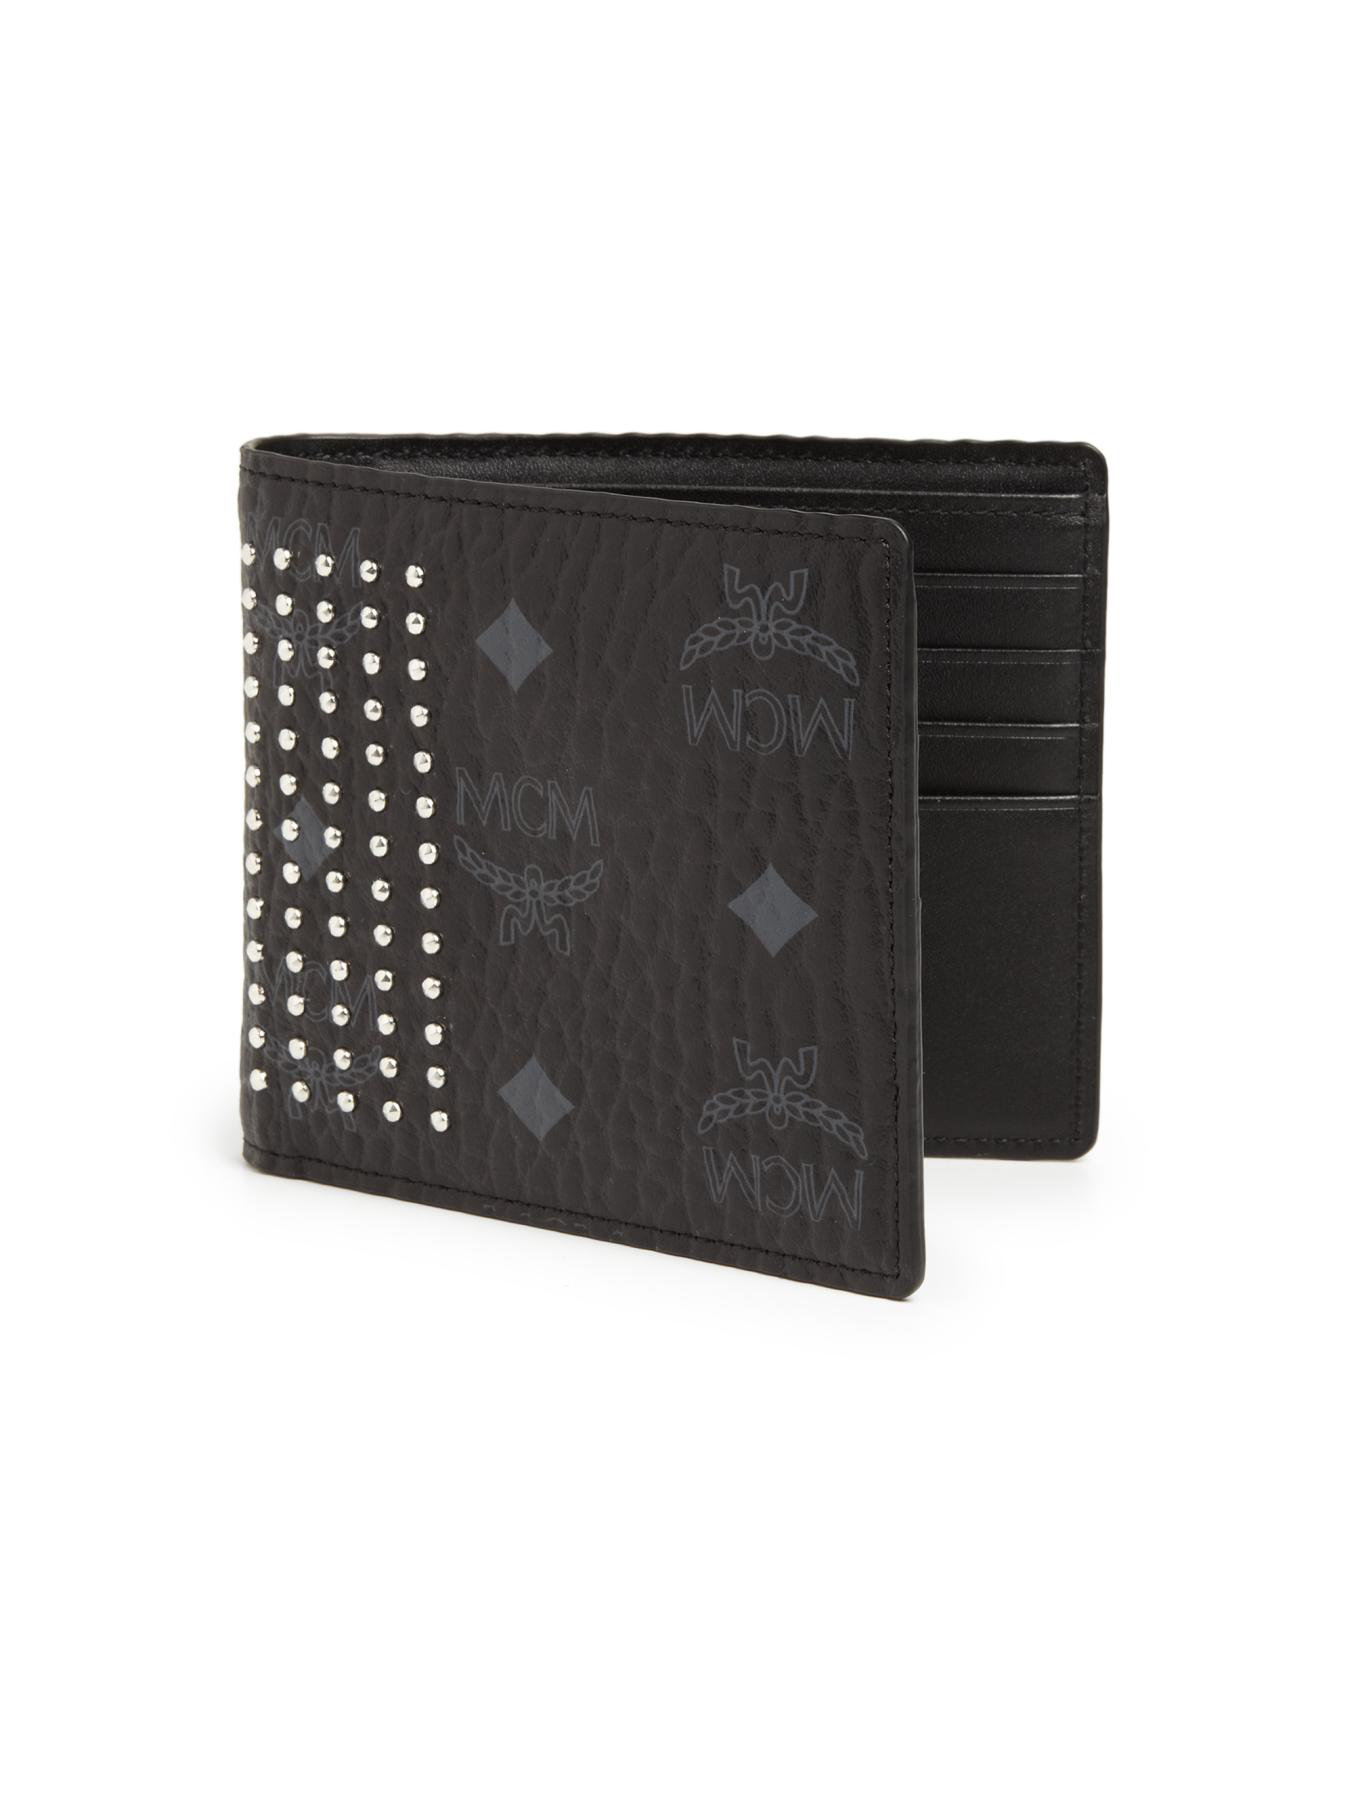 Mcm Neo Stark Coated Canvas Wallet in Black for Men | Lyst